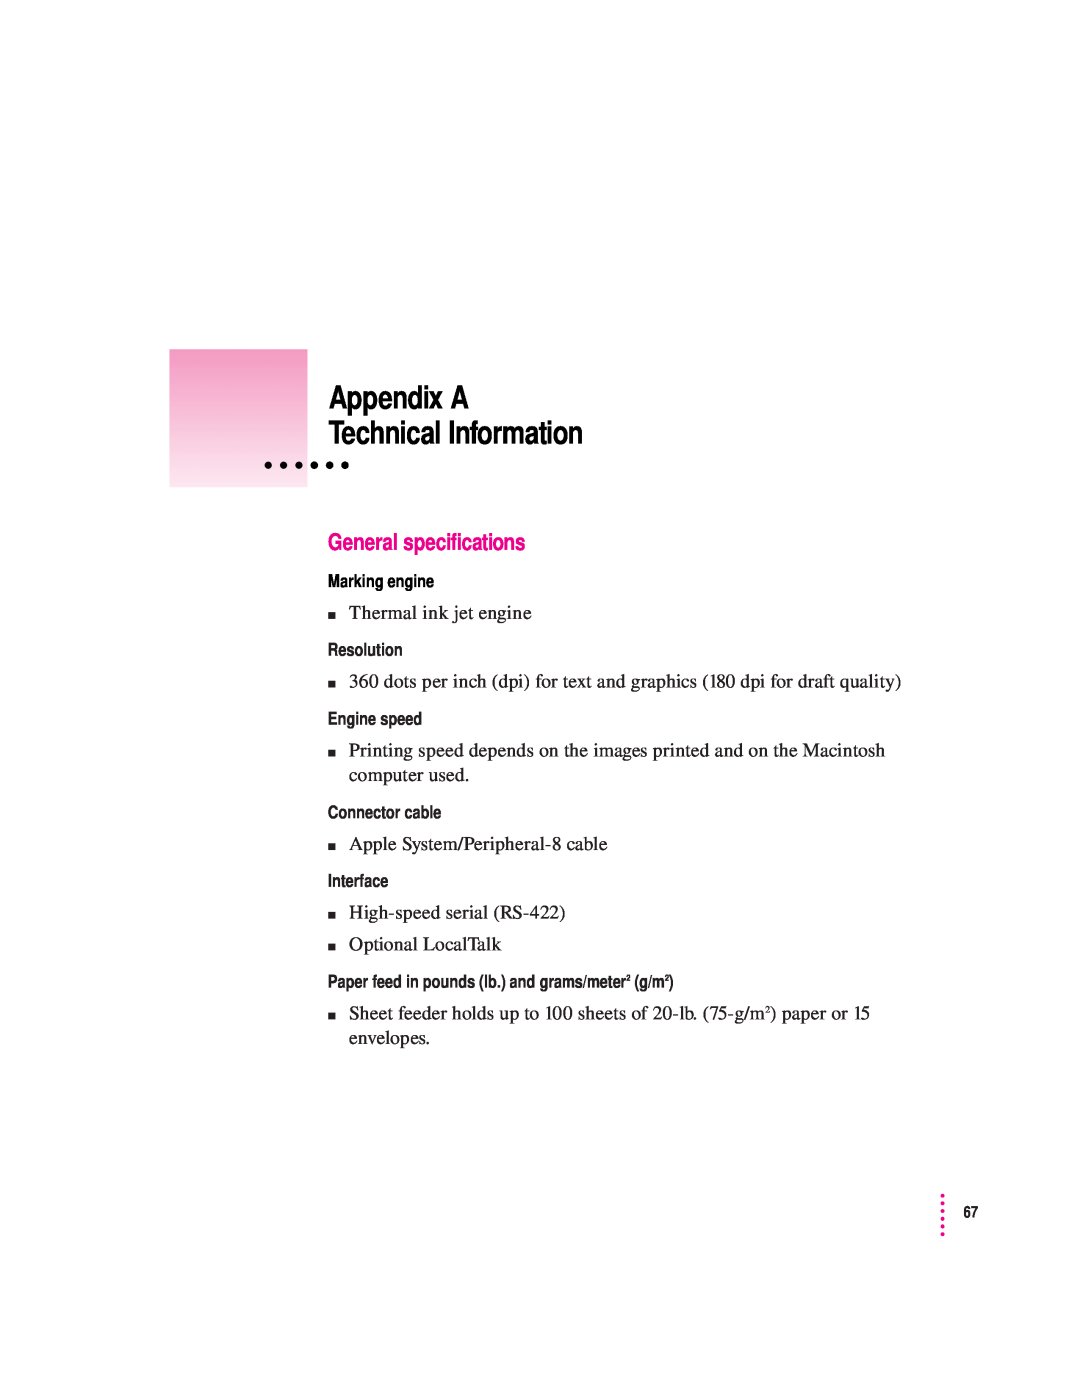 Apple 2400 manual Appendix A Technical Information, General specifications 